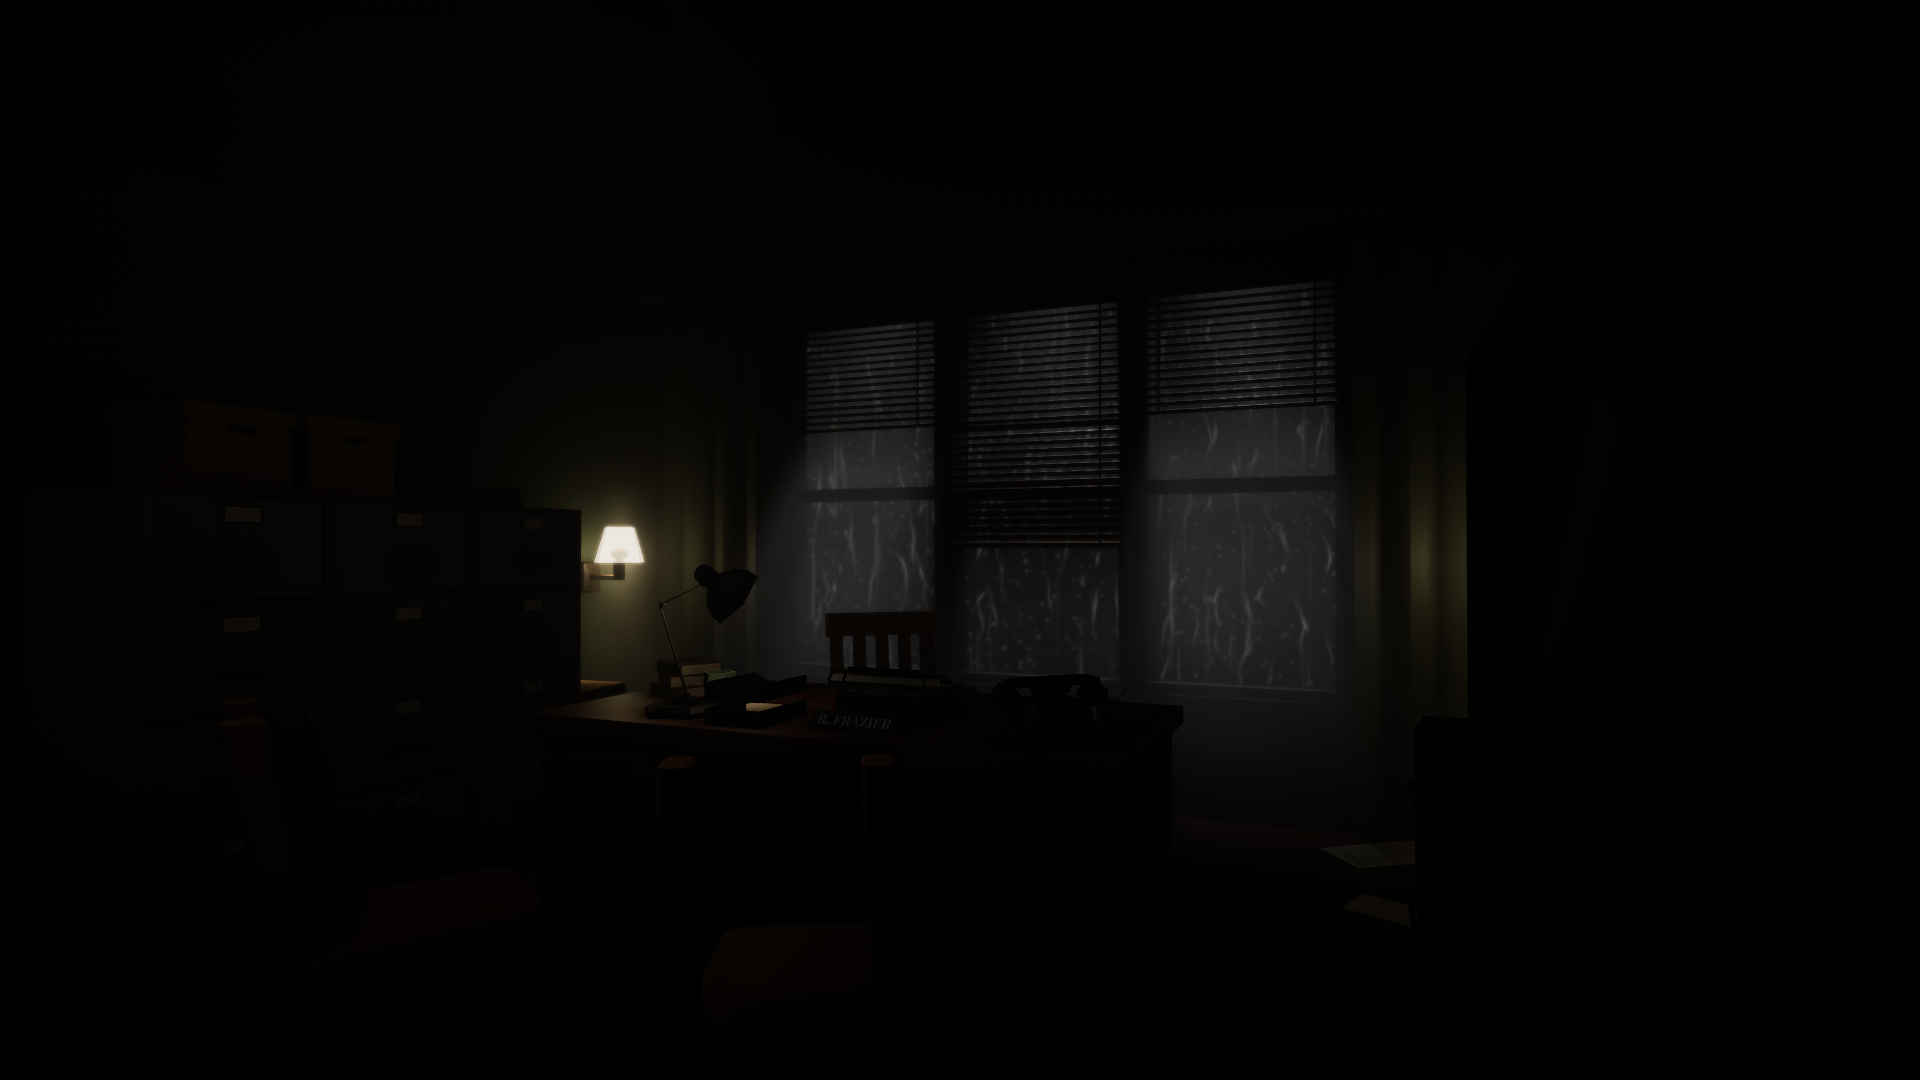 [RELEASED] Blackmail - A Low Poly Horror Game - Release Announcements ...